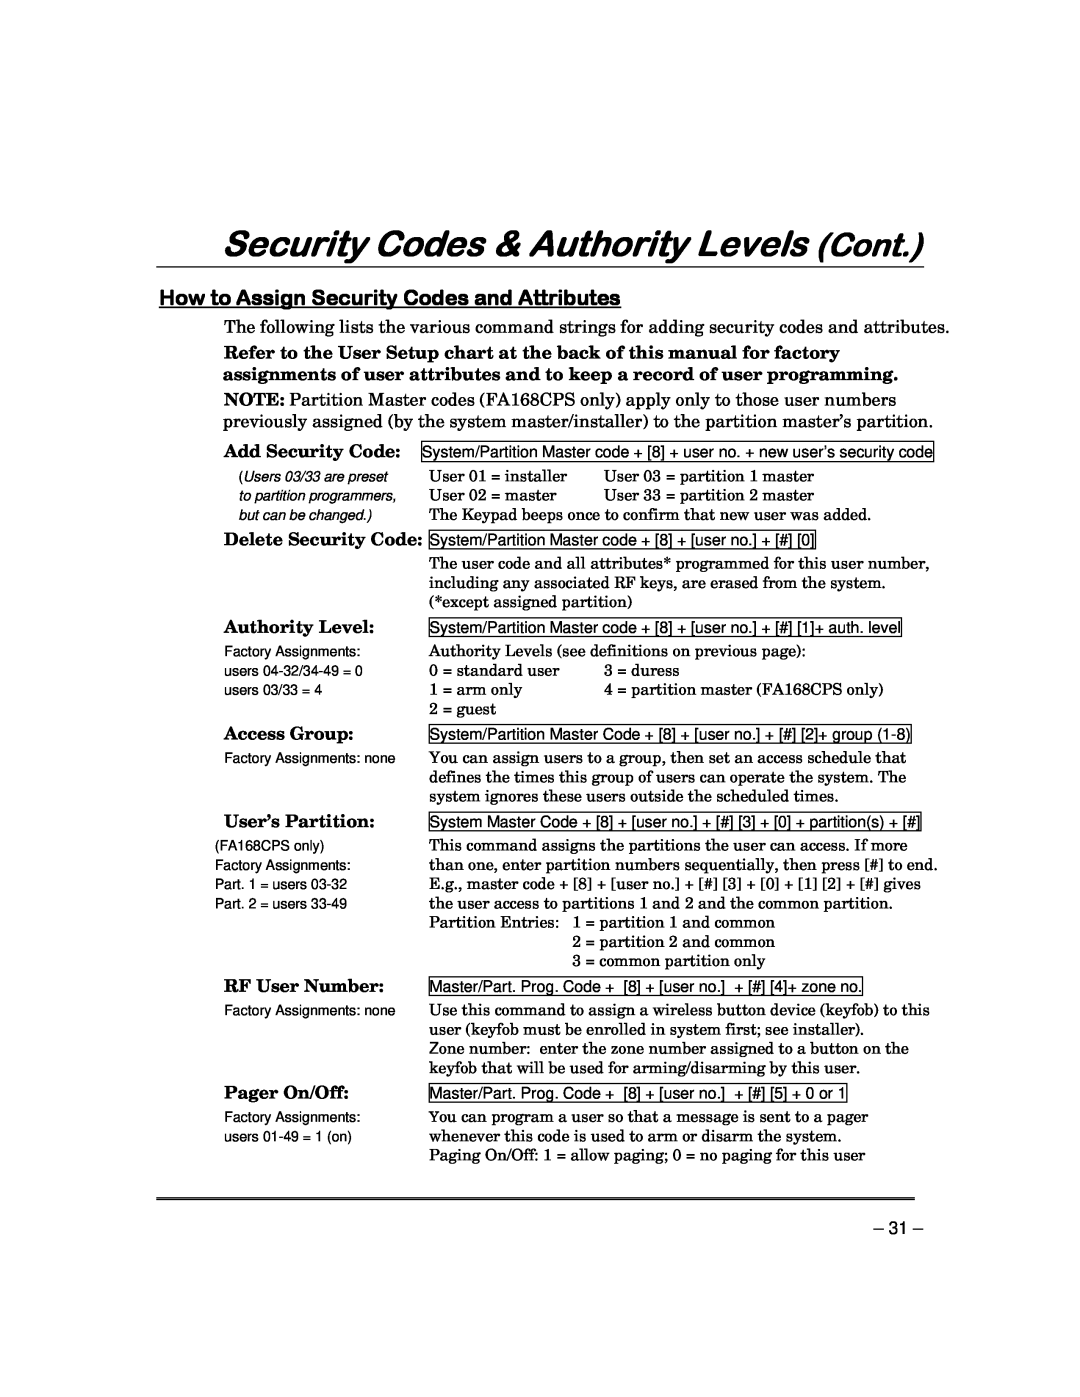 Garmin FA168CPS manual Security Codes & Authority Levels Cont, How to Assign Security Codes and Attributes 